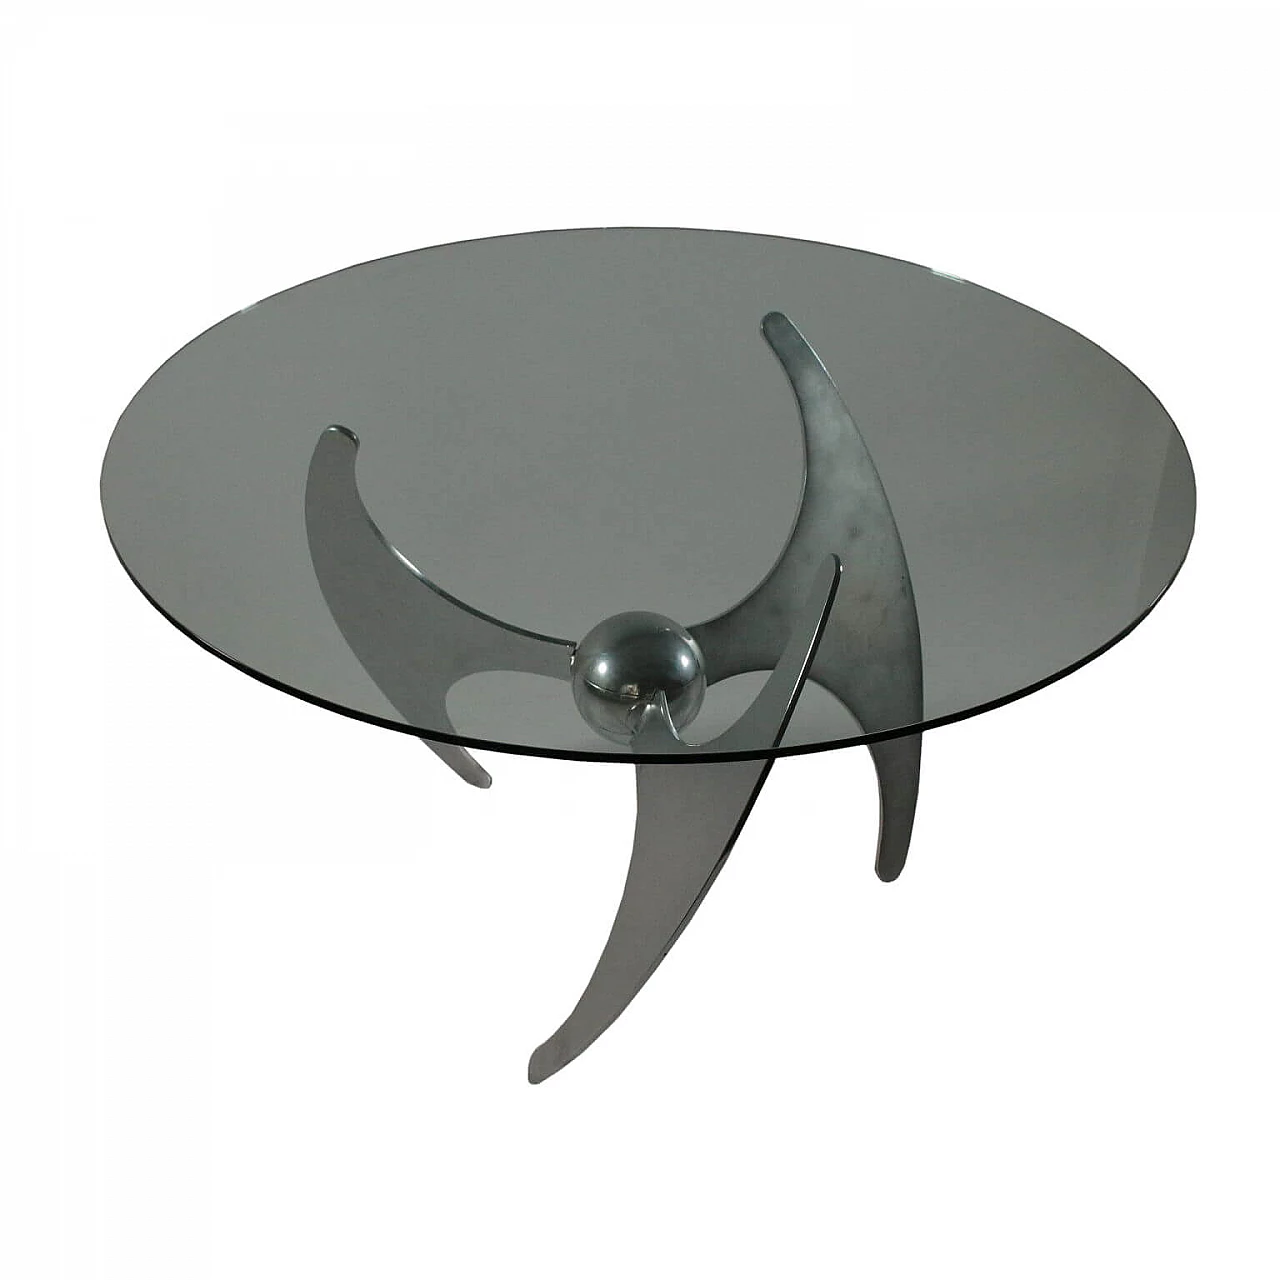 Propeller adjustable table by Luciano Campanini for Cama, 70s 1182434